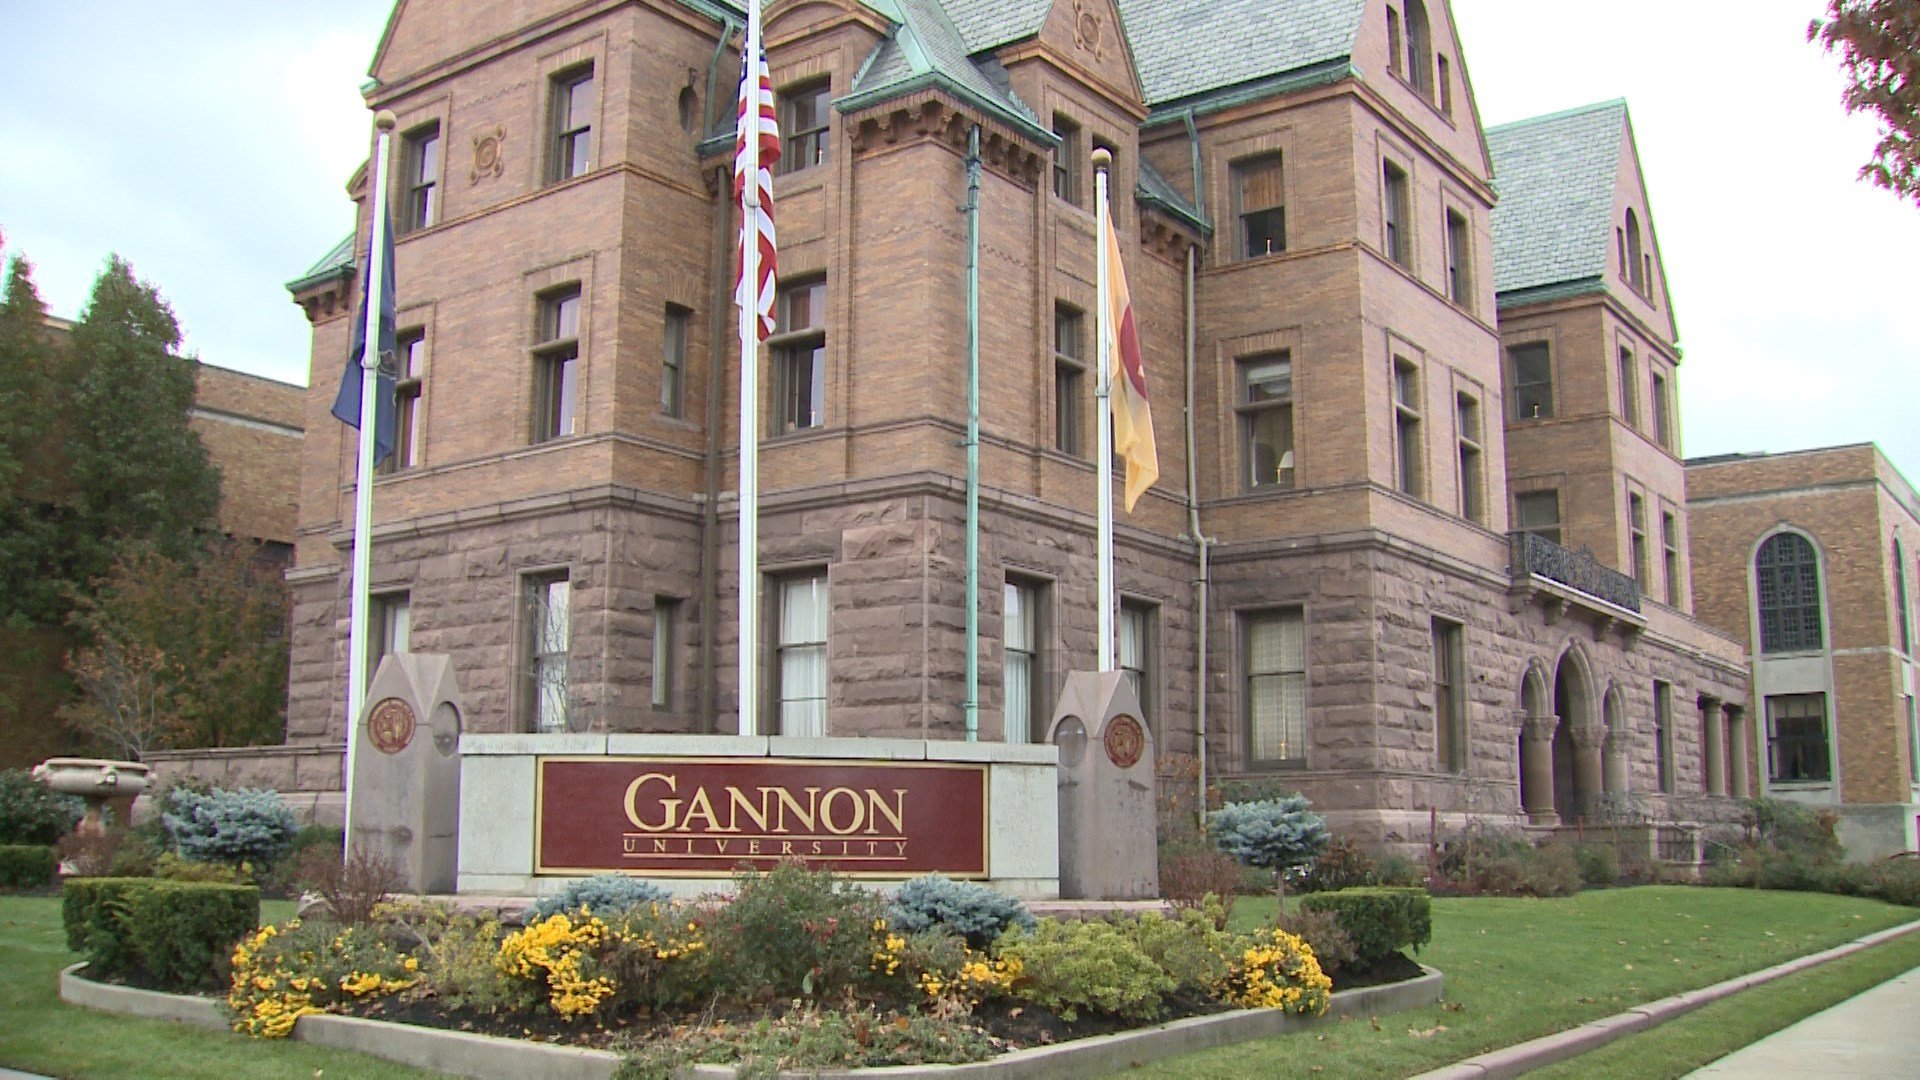 Gannon Beehive Fosters New Businesses Through Connections